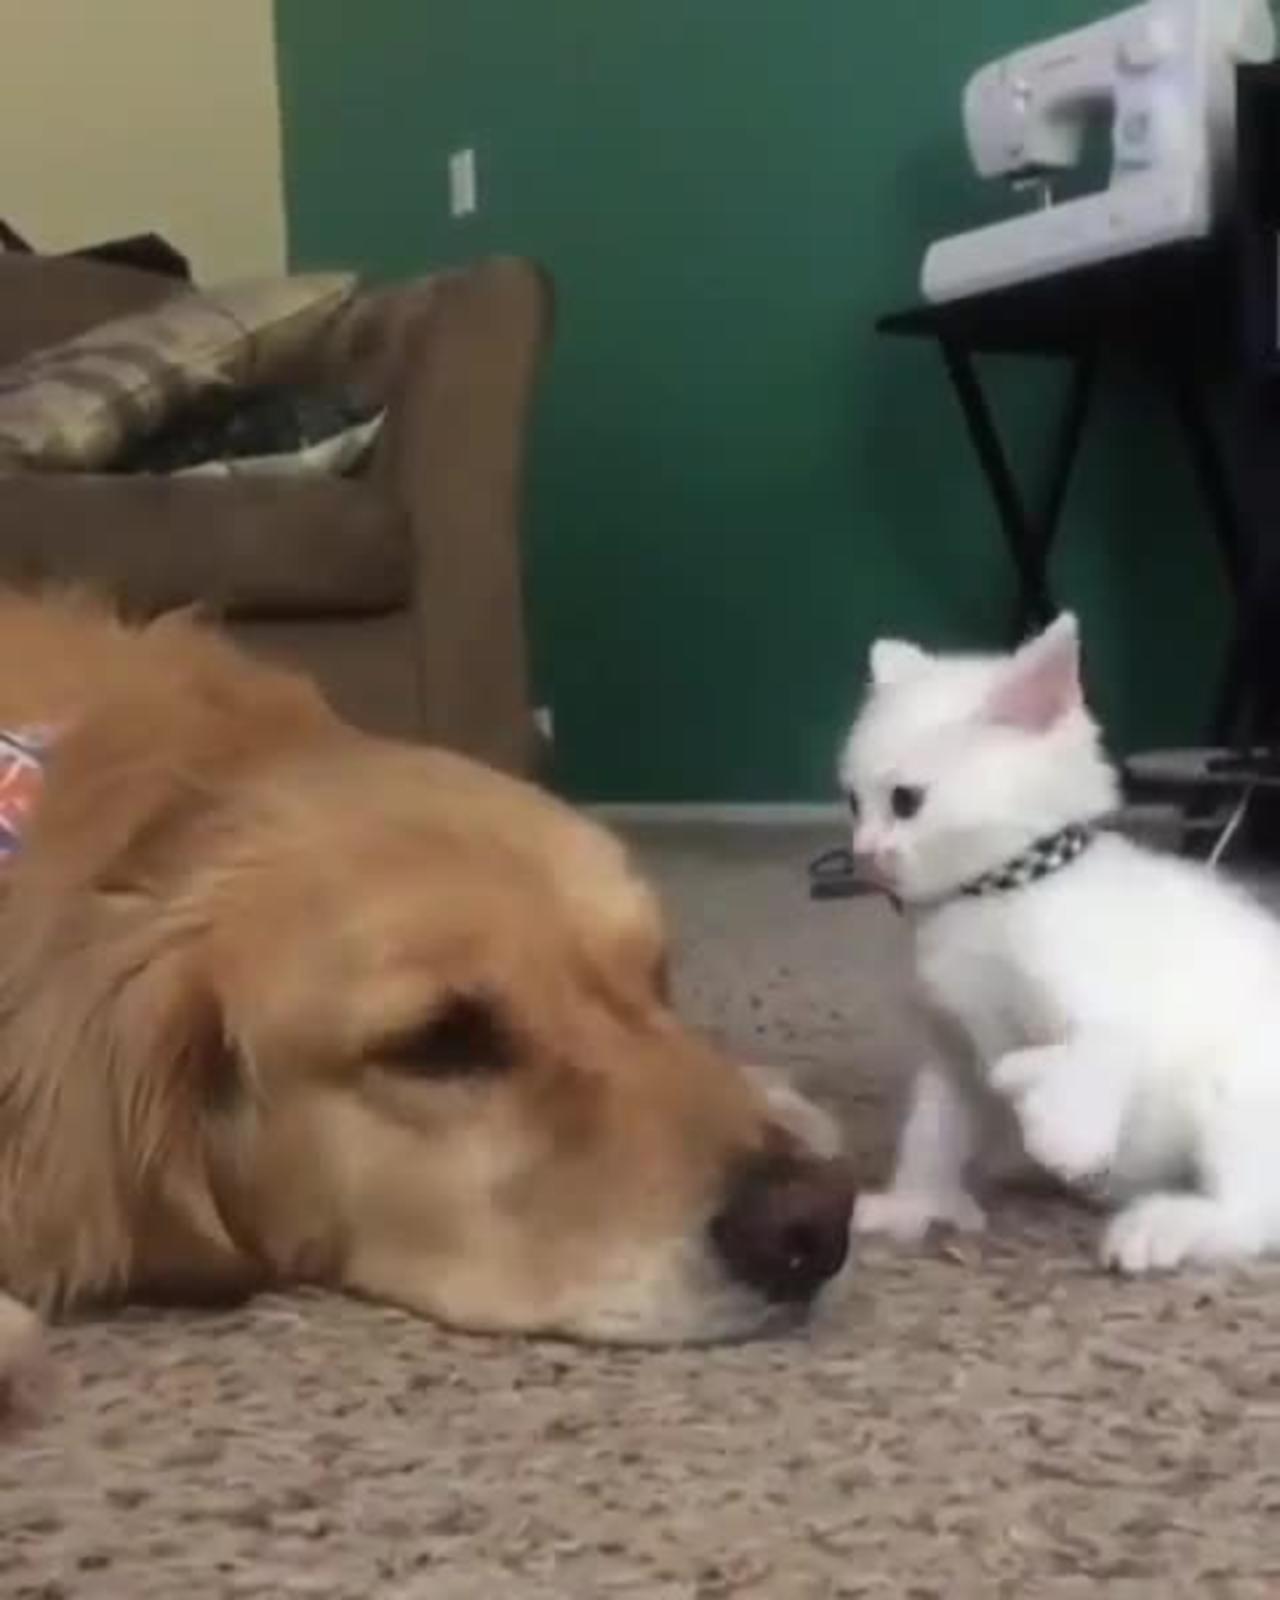 The little white cat is bullying the big yellow dog again